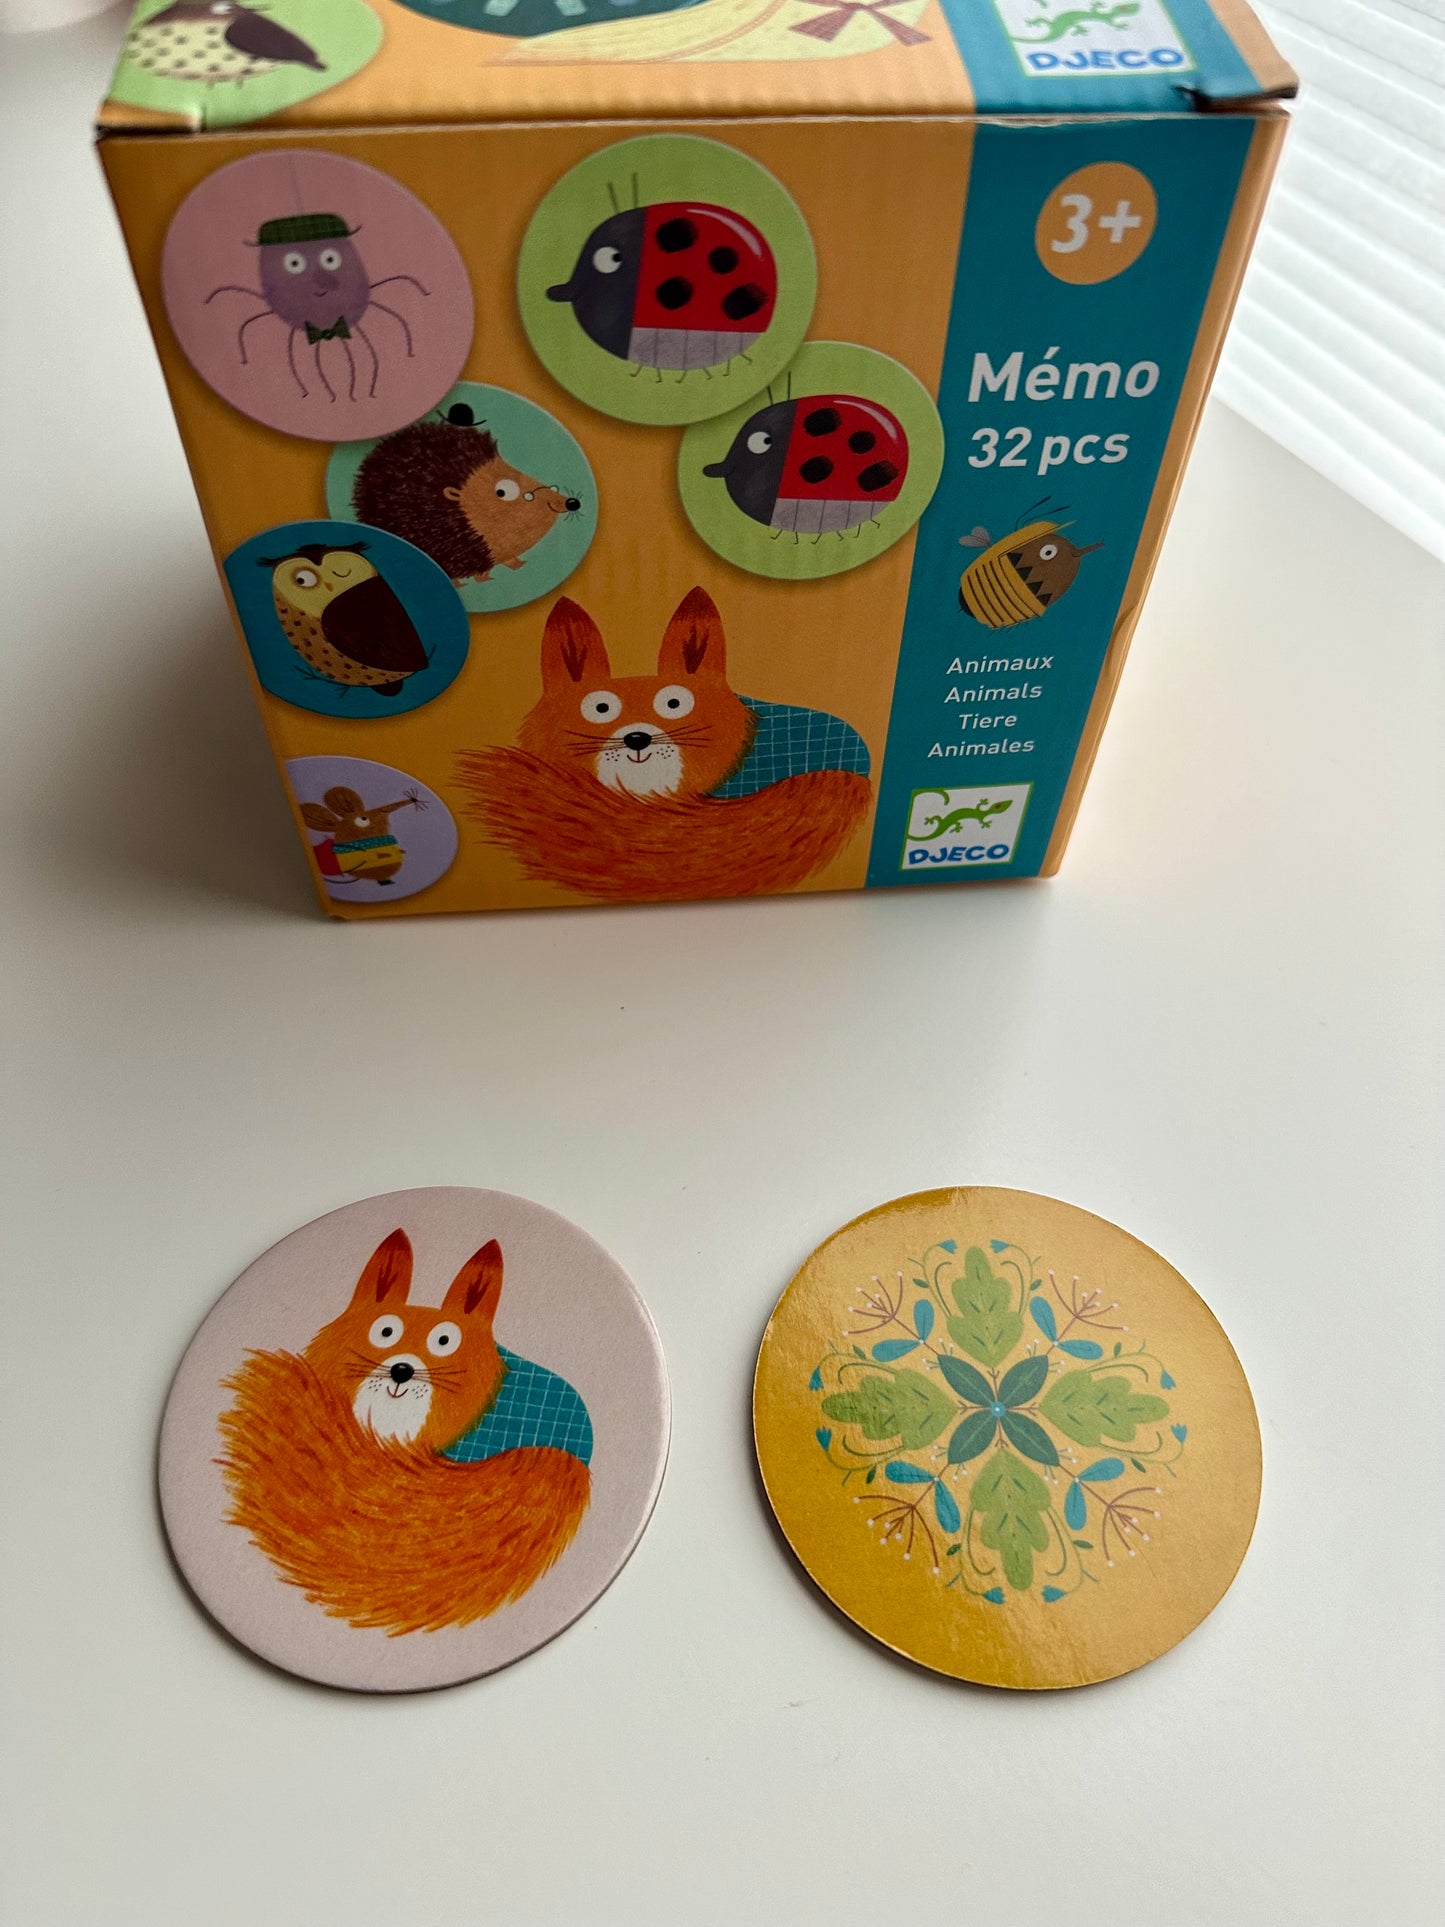 Memory Game with large sturdy pieces for little hands pick up 45245